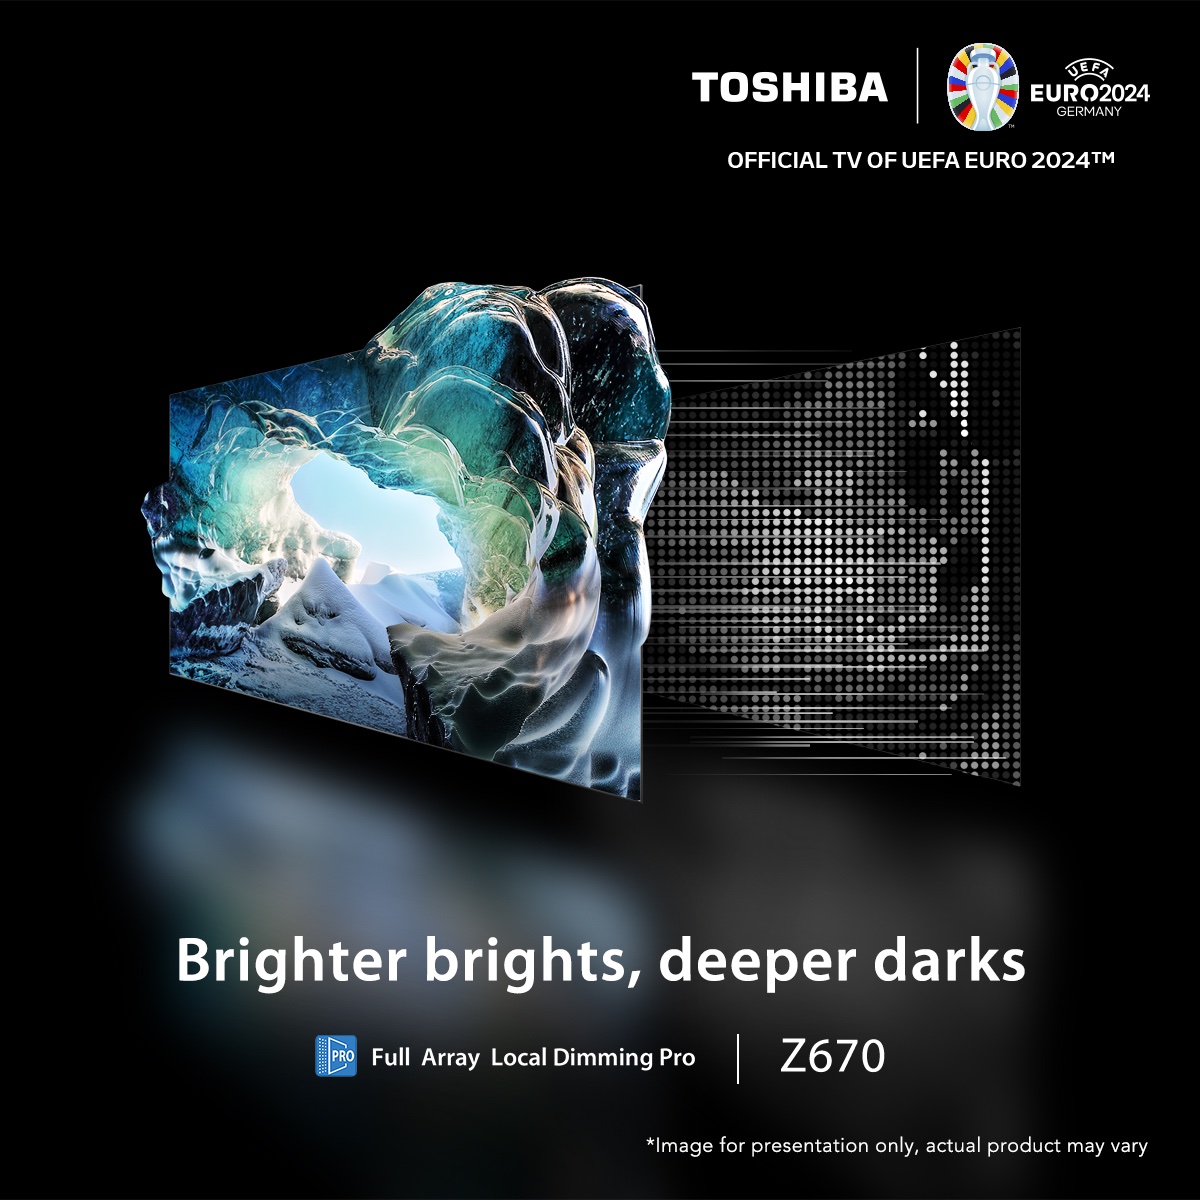 Even the shadows deserve their spotlight. With Z670's Full-Array Local Dimming Pro, #ToshibaTV outshines the stars and city lights, ensuring your cinematic experience is as immersive as it gets. Which movie do you think would look best on this TV? Comment below!